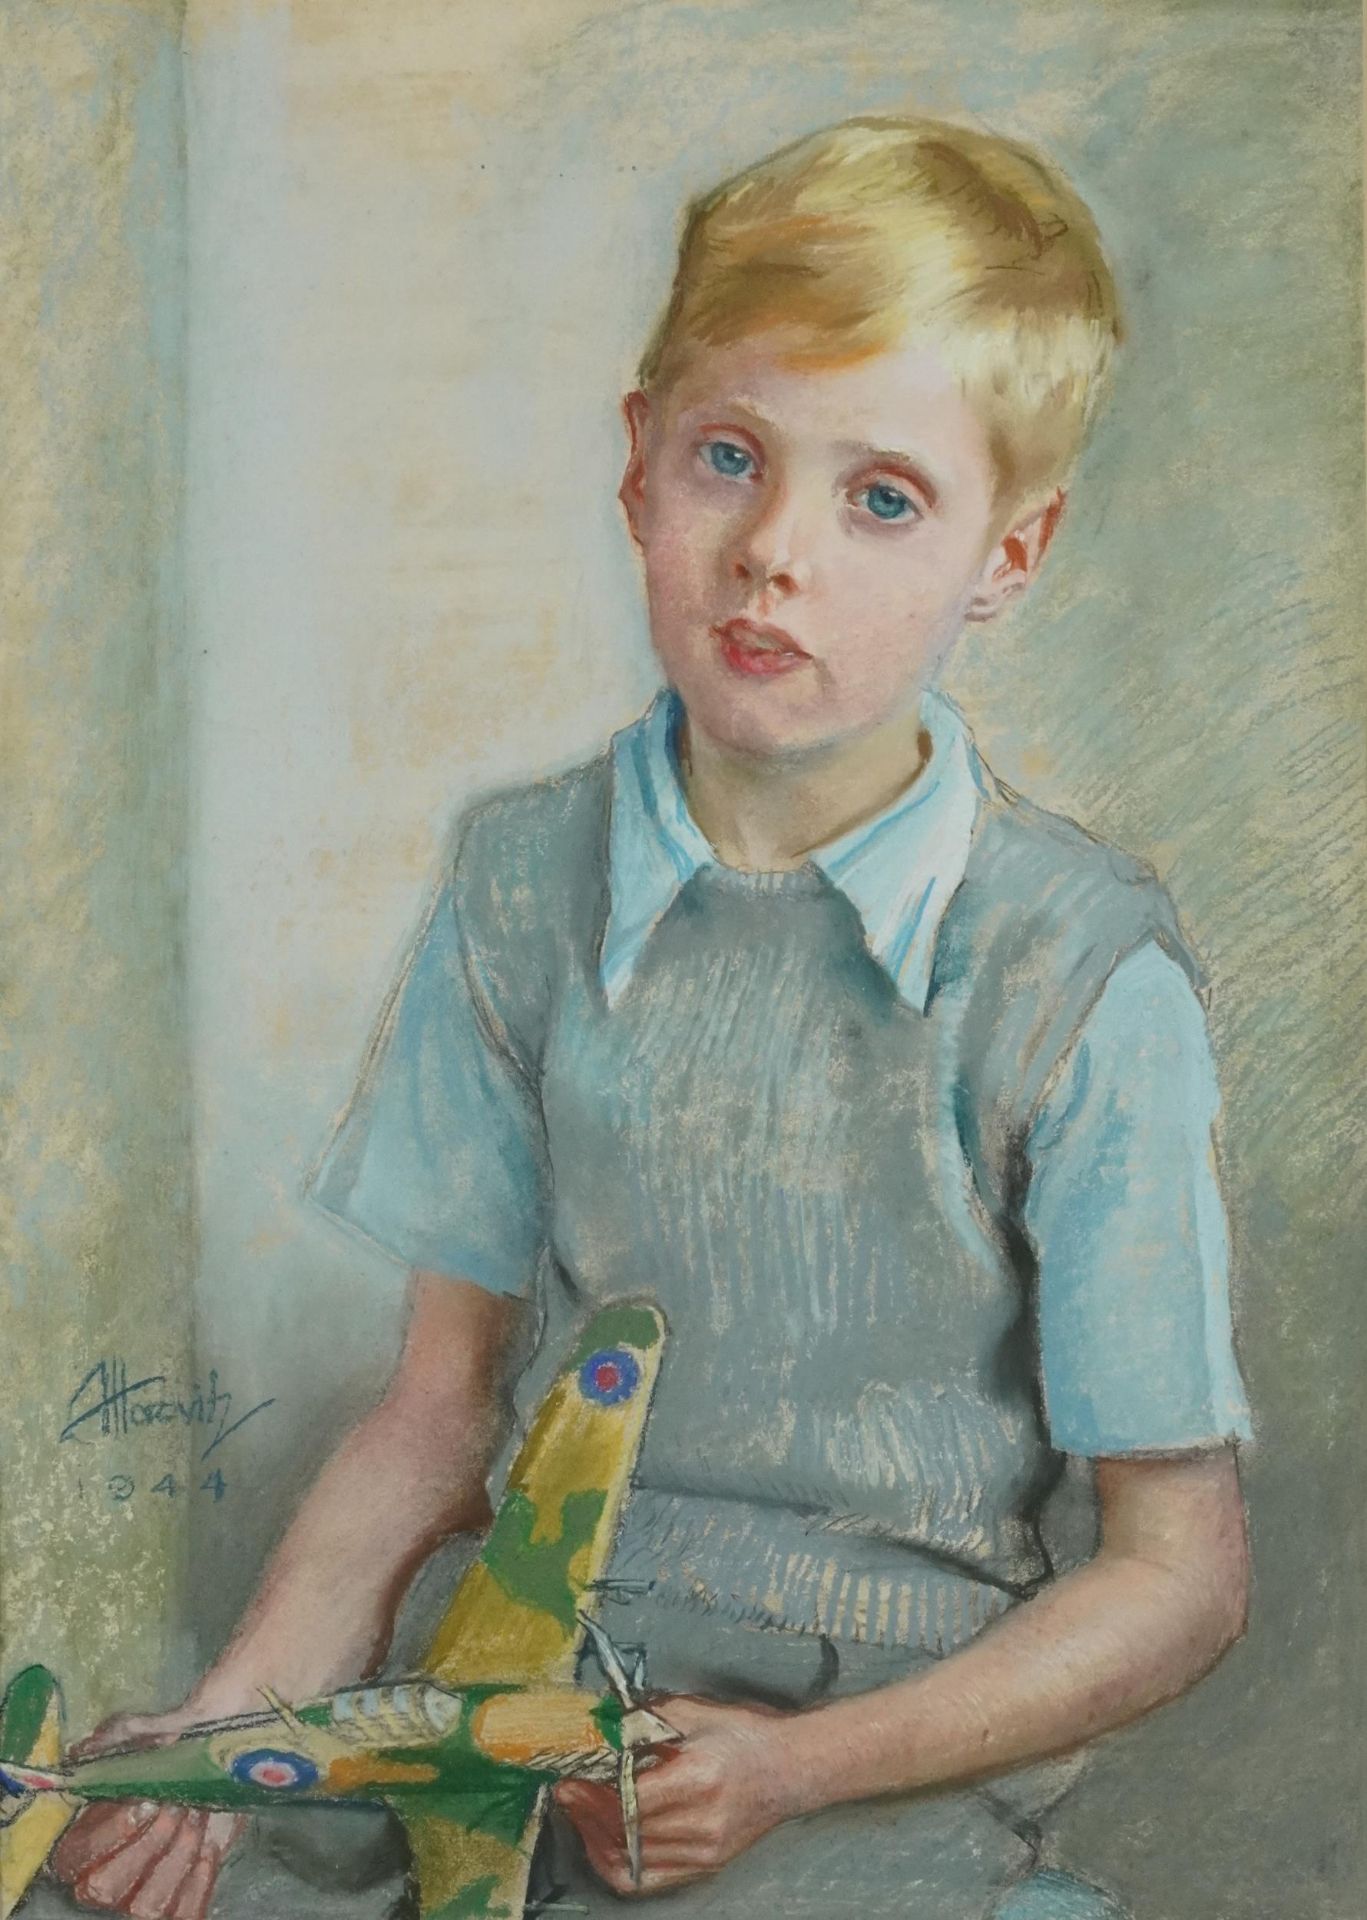 Armin Horovitz 1944 - Portrait of a young boy holding a model of a Spitfire, World War II military